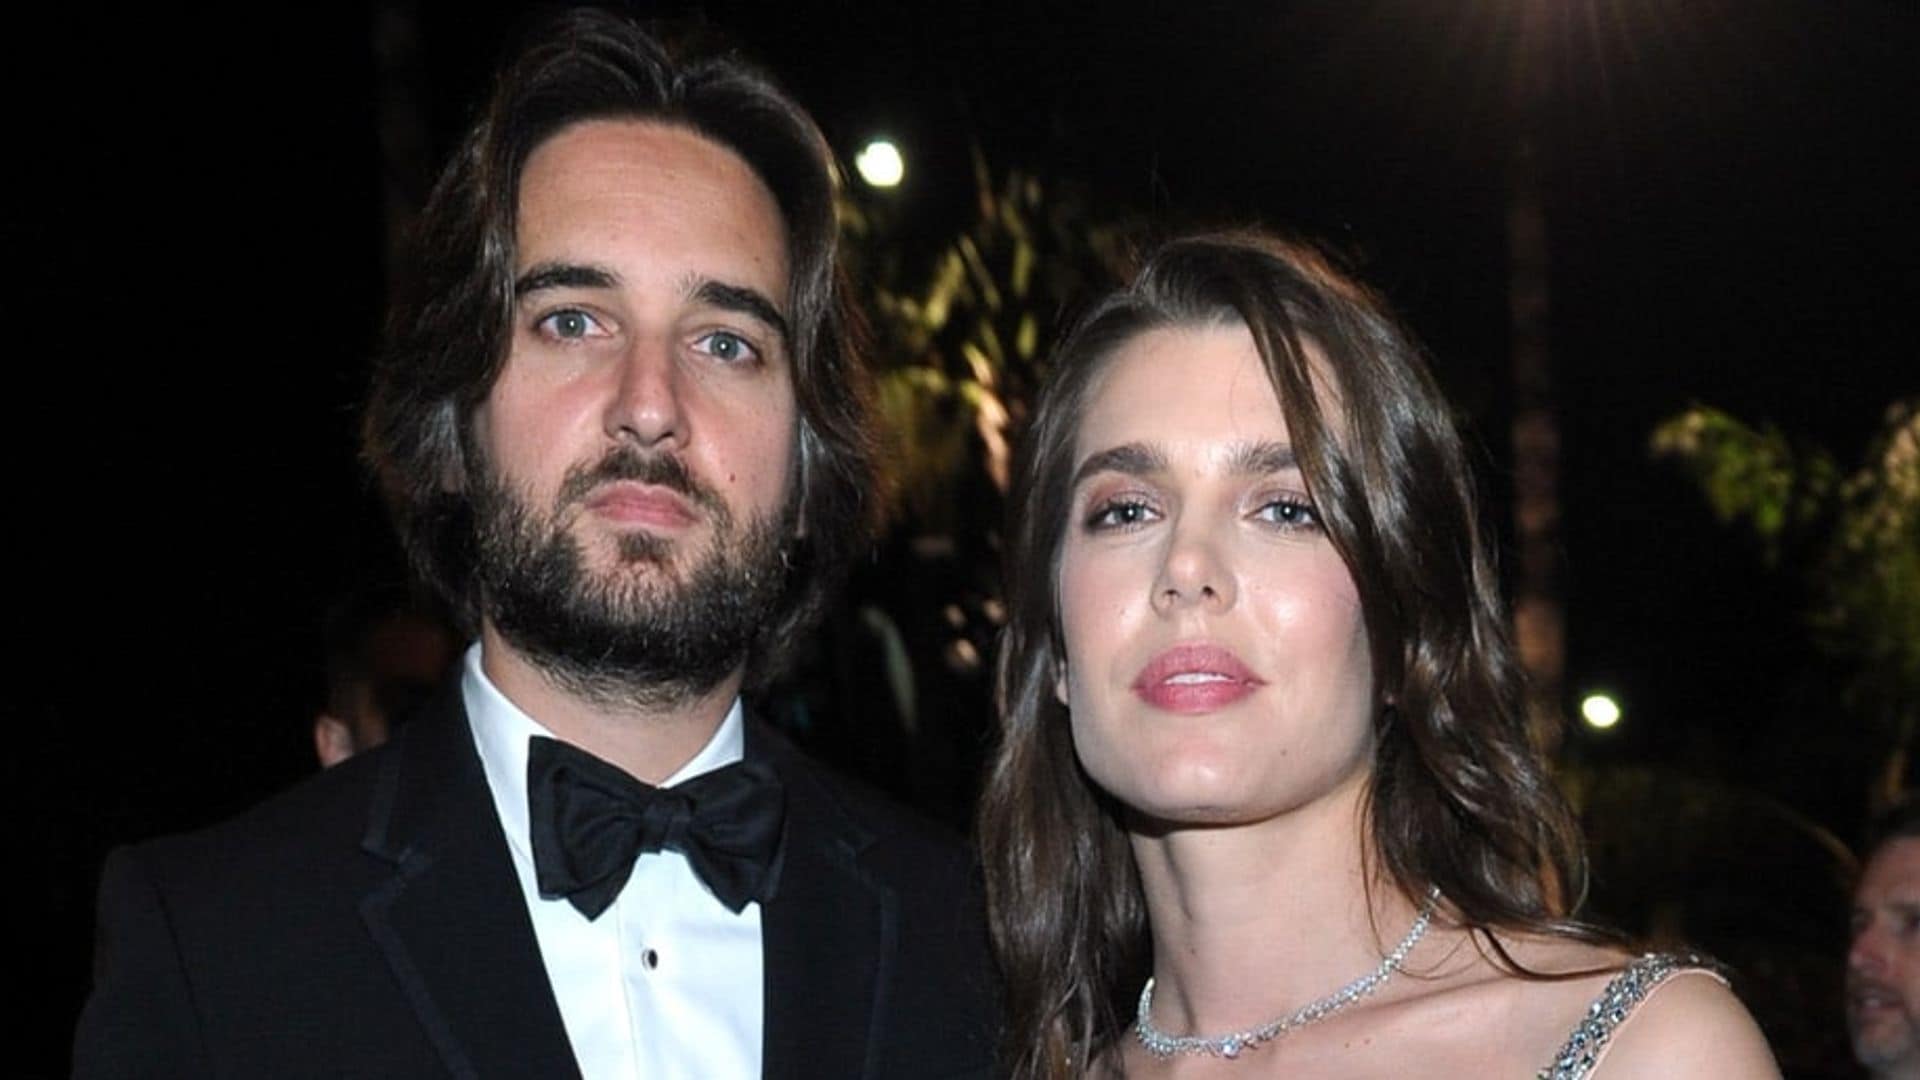 Simple wedding or fairytale dream? This is how we imagine Charlotte Casiraghi and Dimitri Rassam's wedding